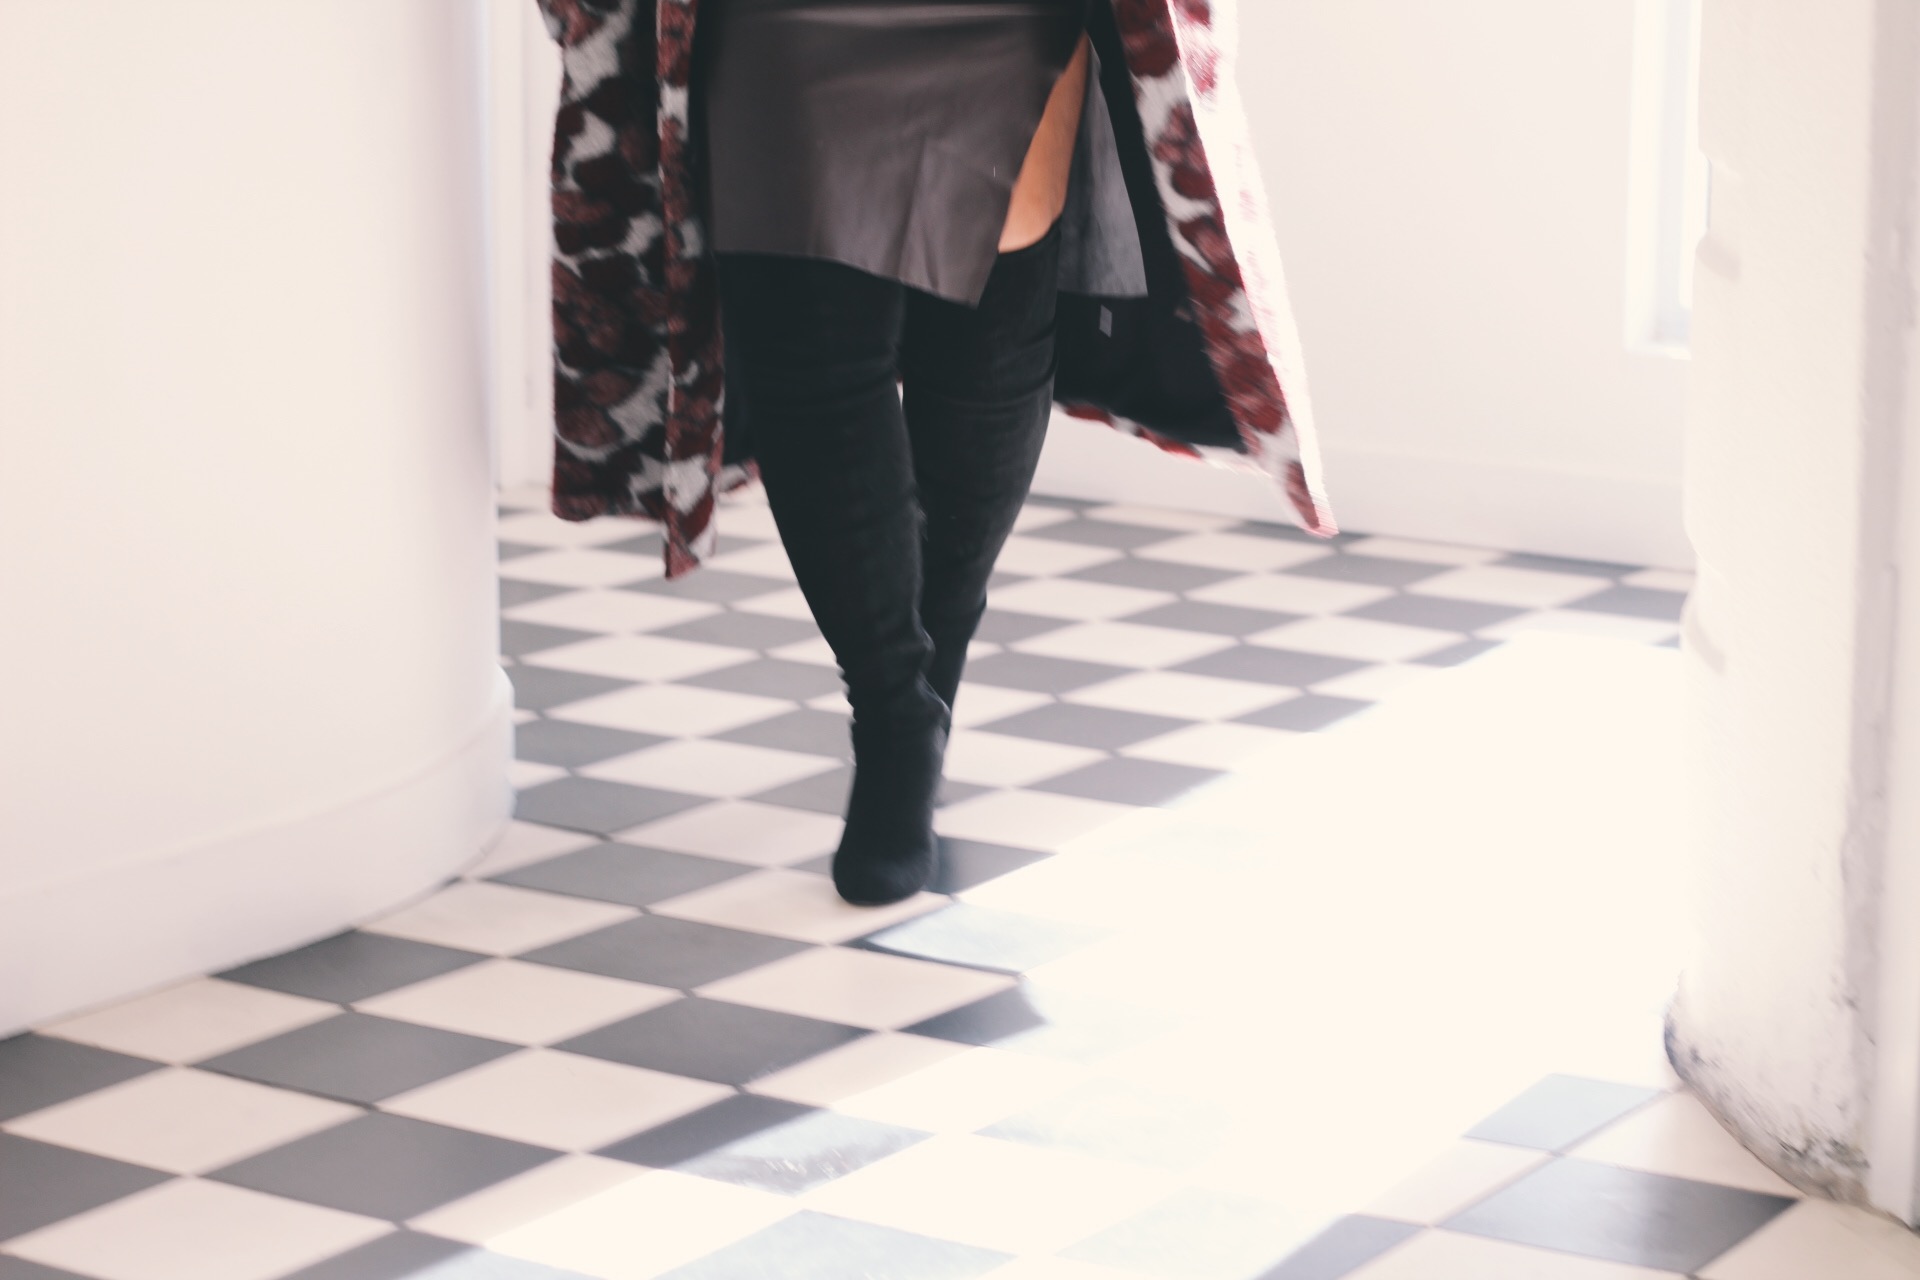 Durham-Hotel-Robinson-Style-rent-the-runway-hutch-floral-coat-milly-stripe-top-loft-leather-pencil-skirt-asos-over-the-knee-boot.JPG-4.JPG